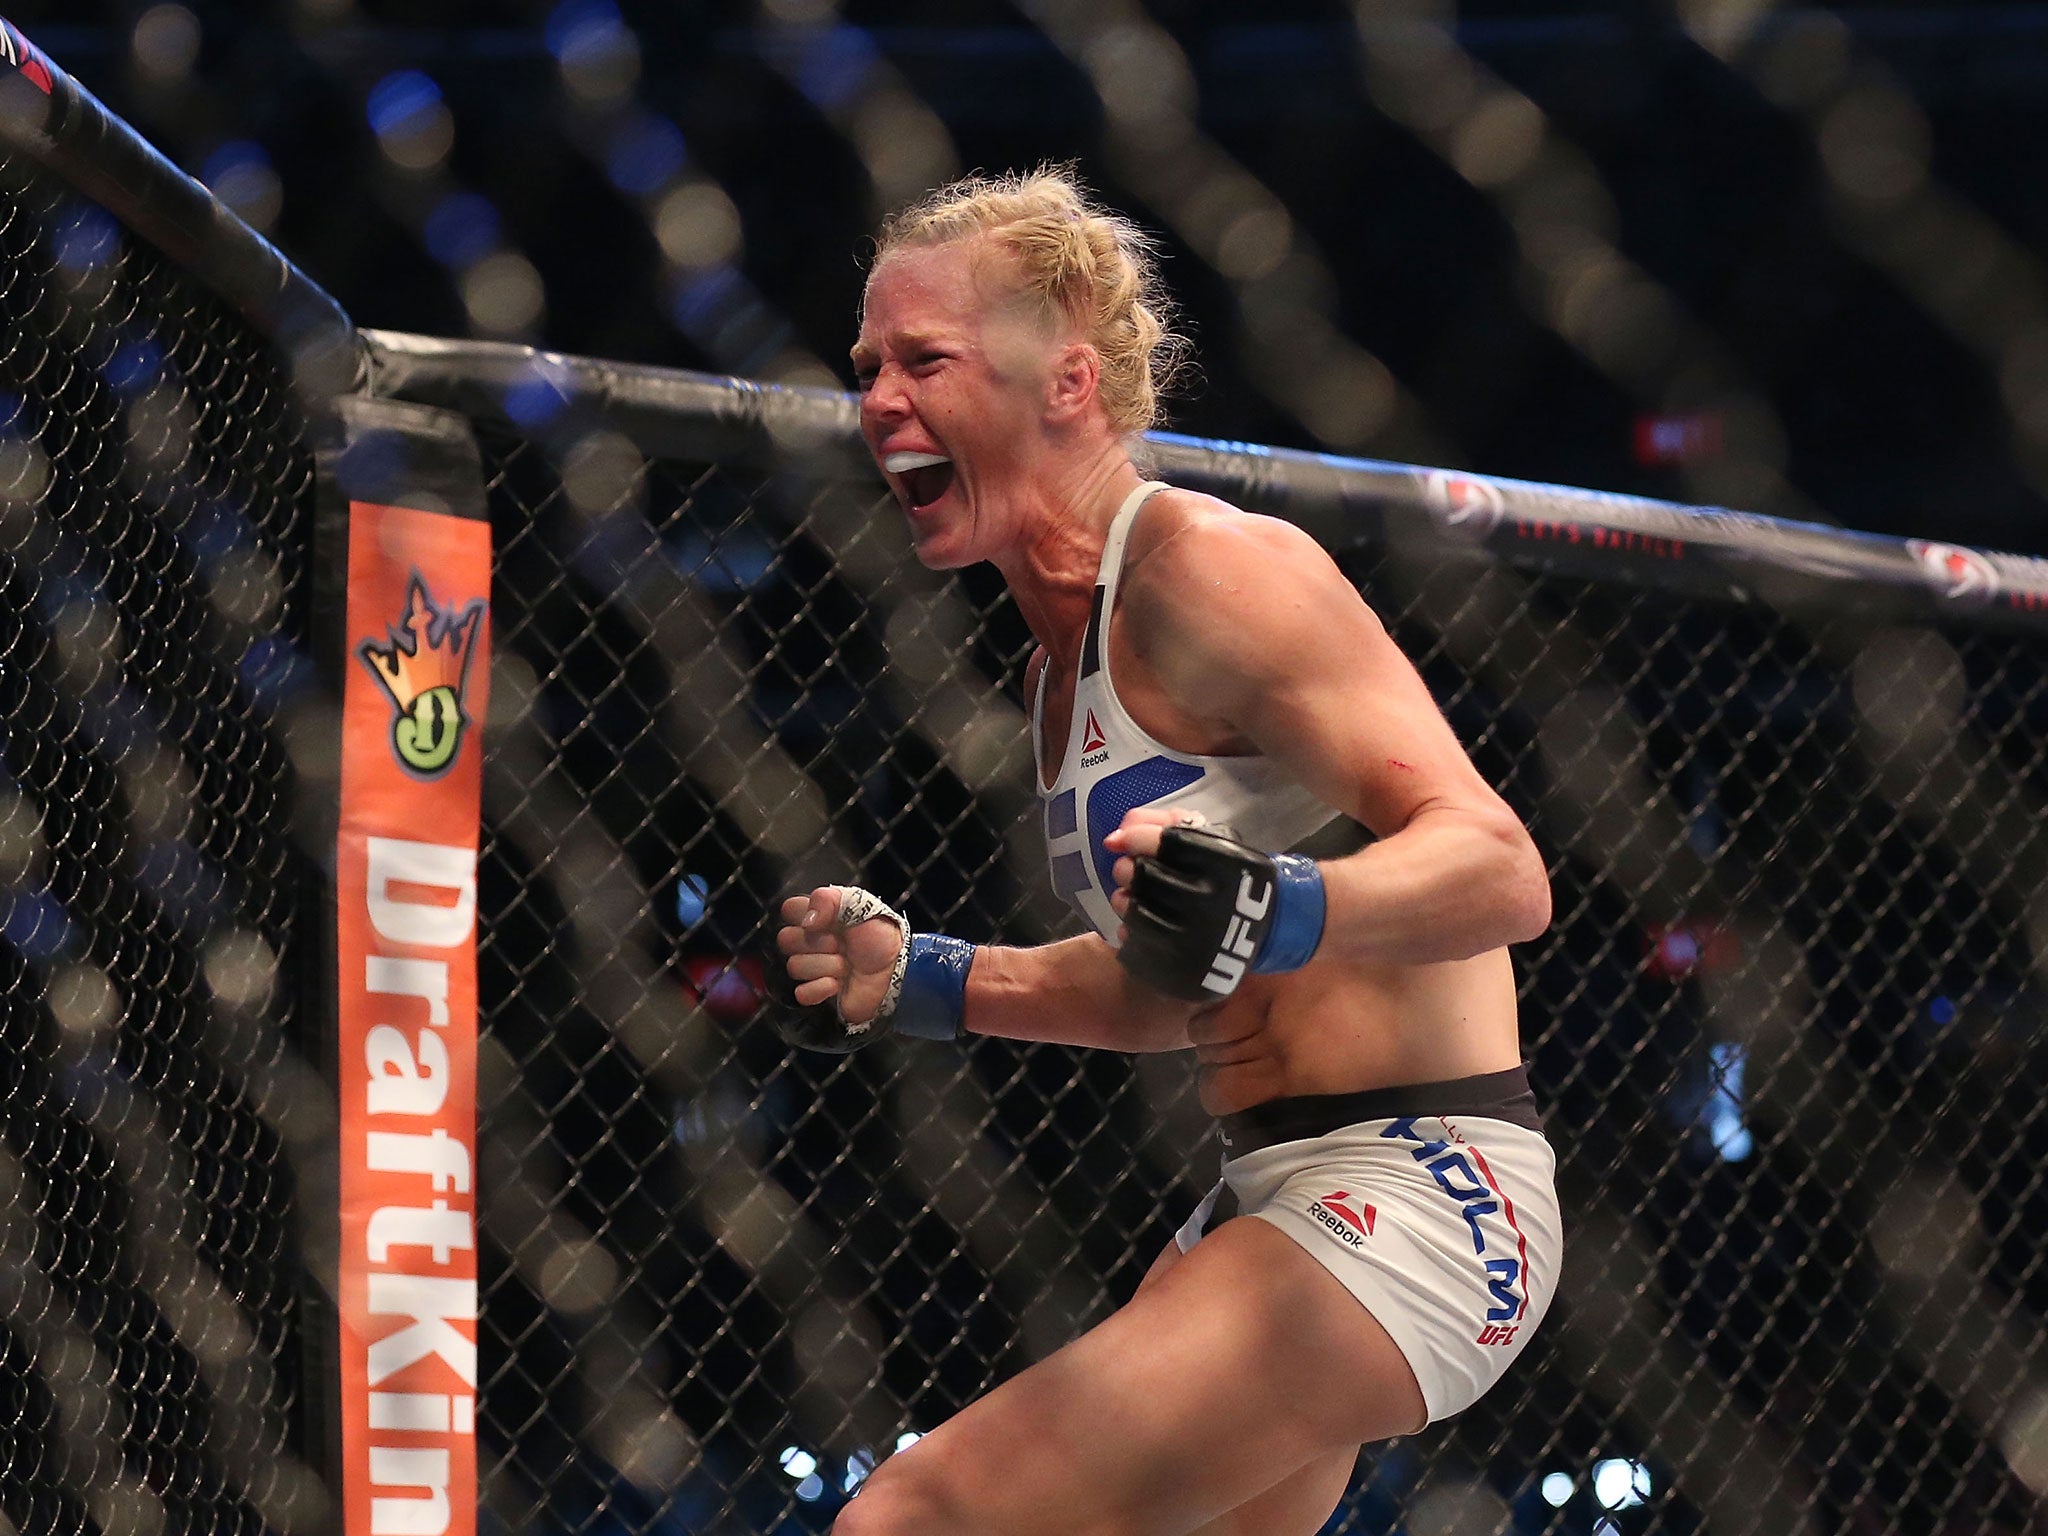 Holm celebrates her victory over Rousey